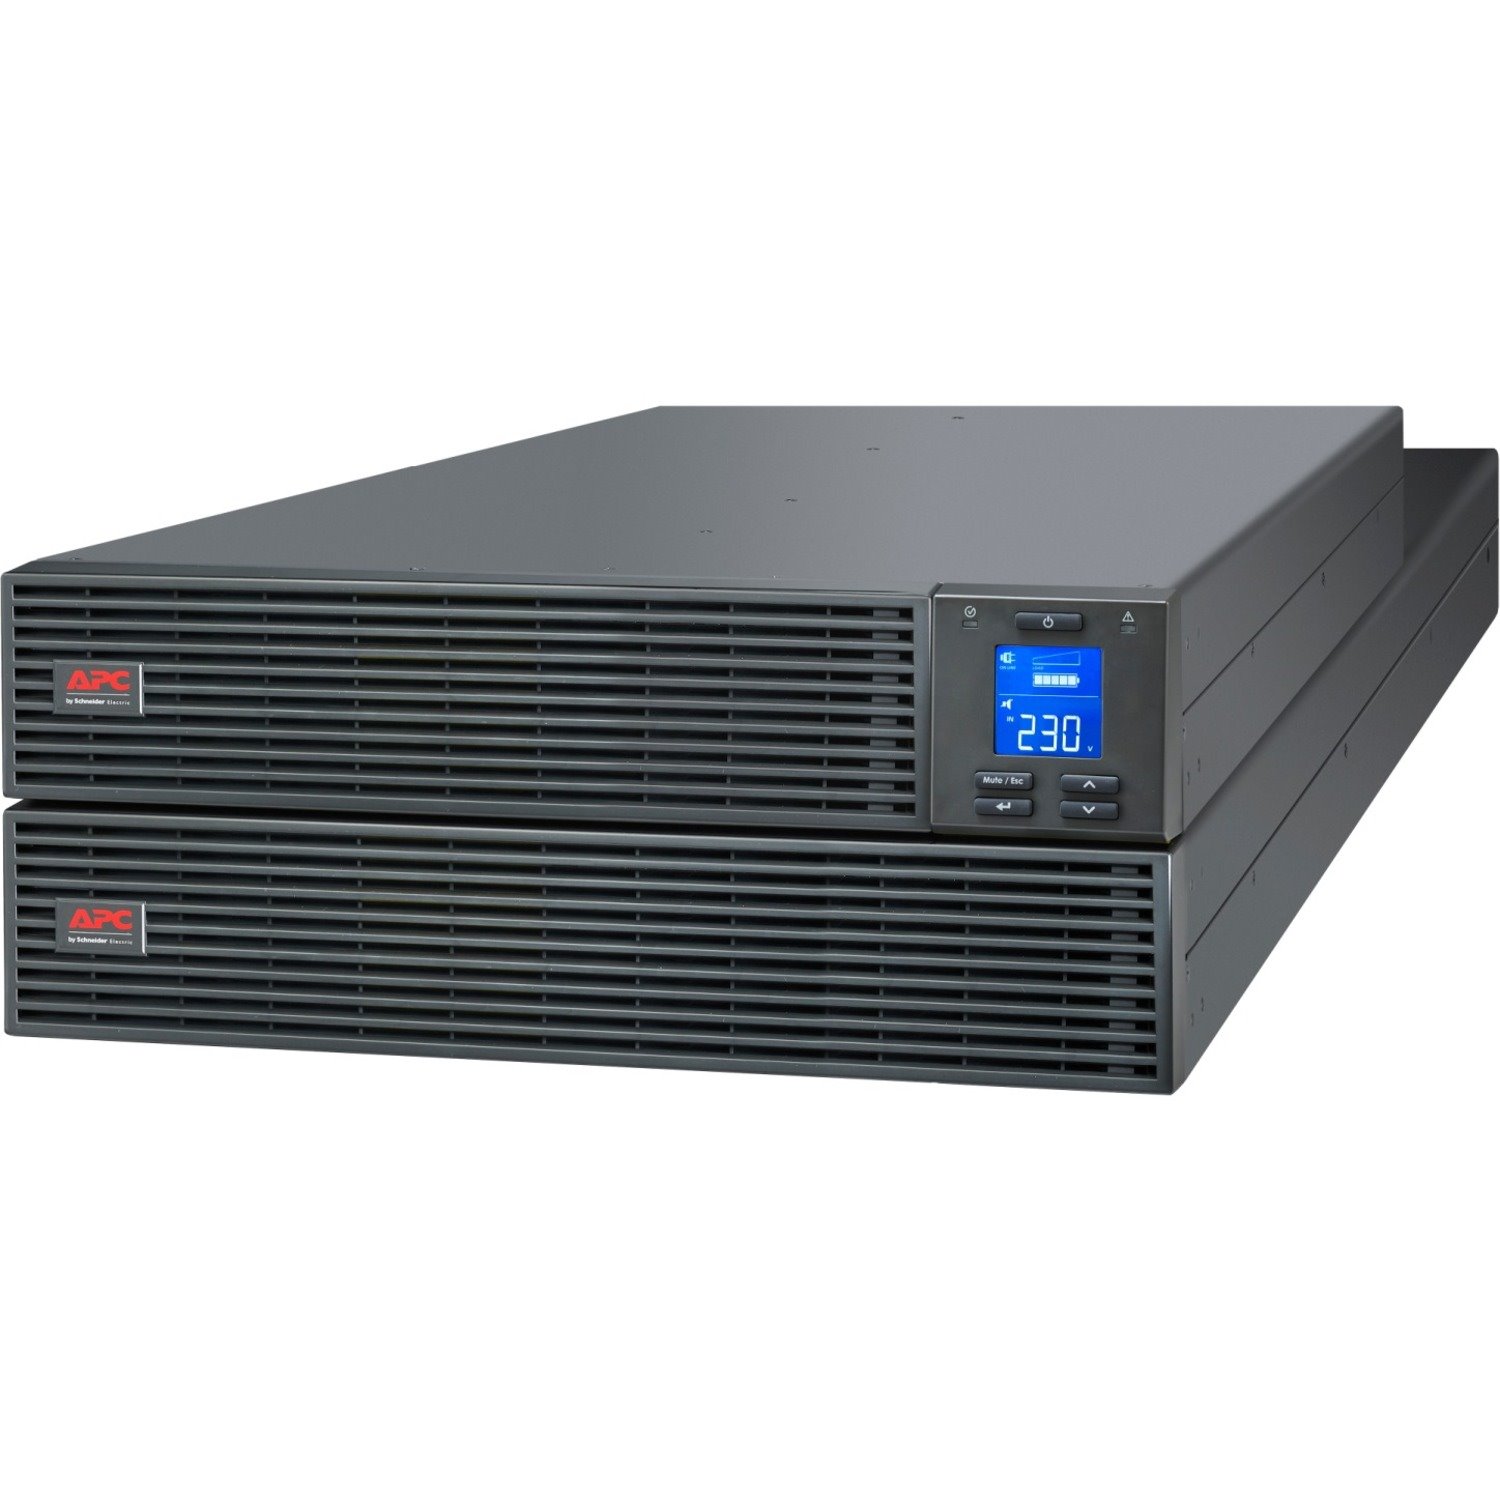 APC by Schneider Electric Easy UPS SRV6KRI Double Conversion Online UPS - 6 kVA/6 kW